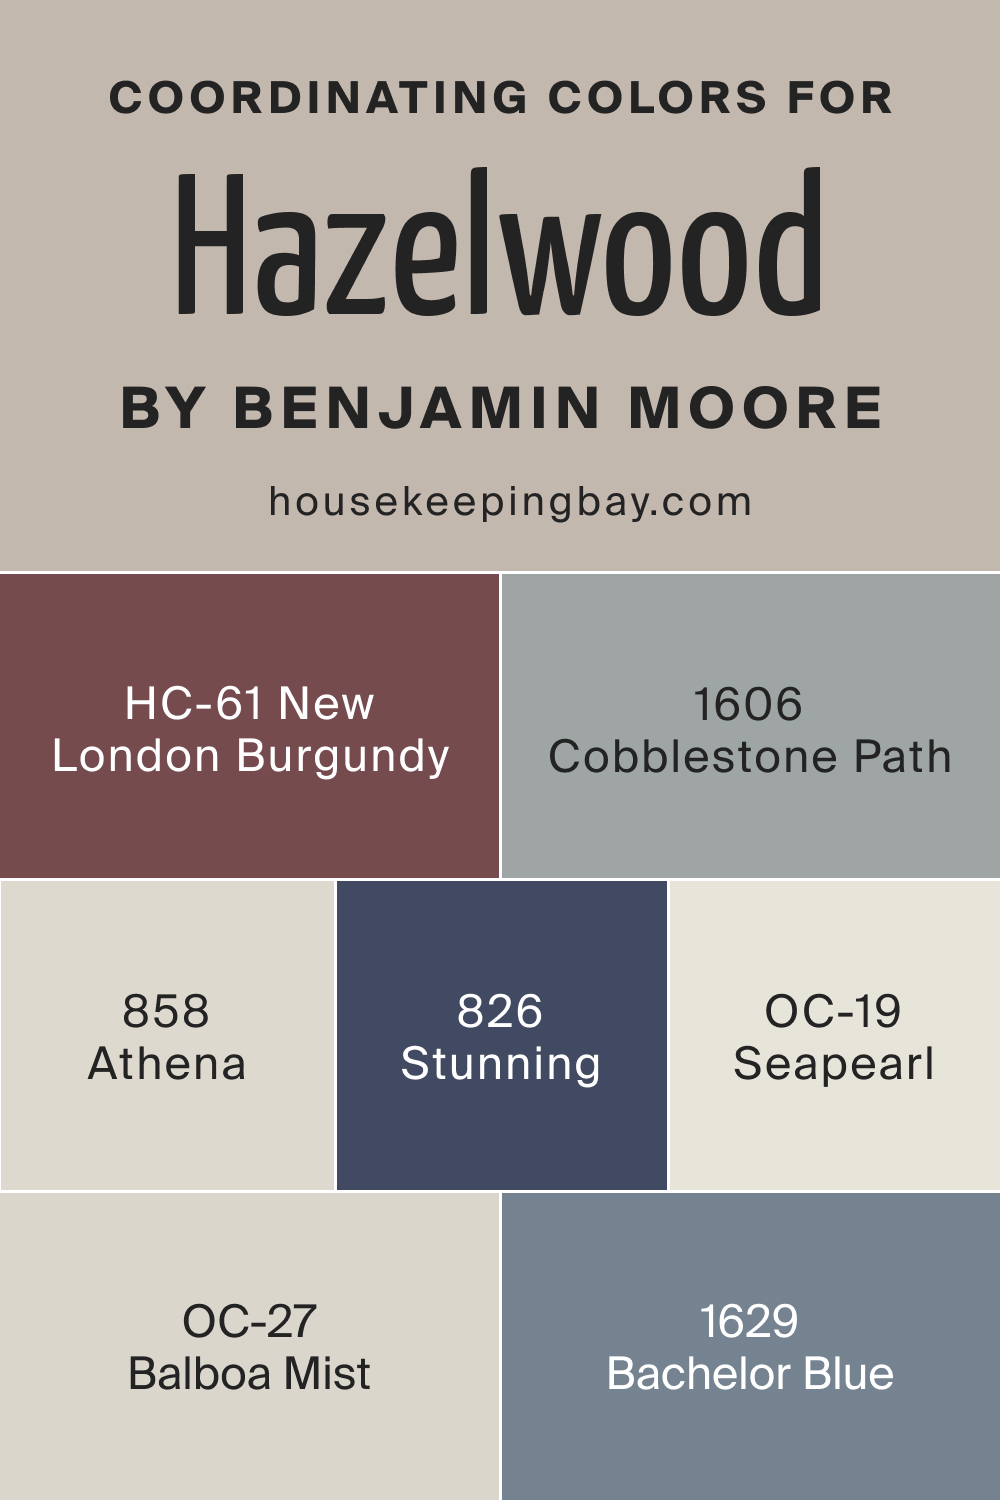 Coordinating Colors for BM Hazelwood 1005 by Benjamin Moore